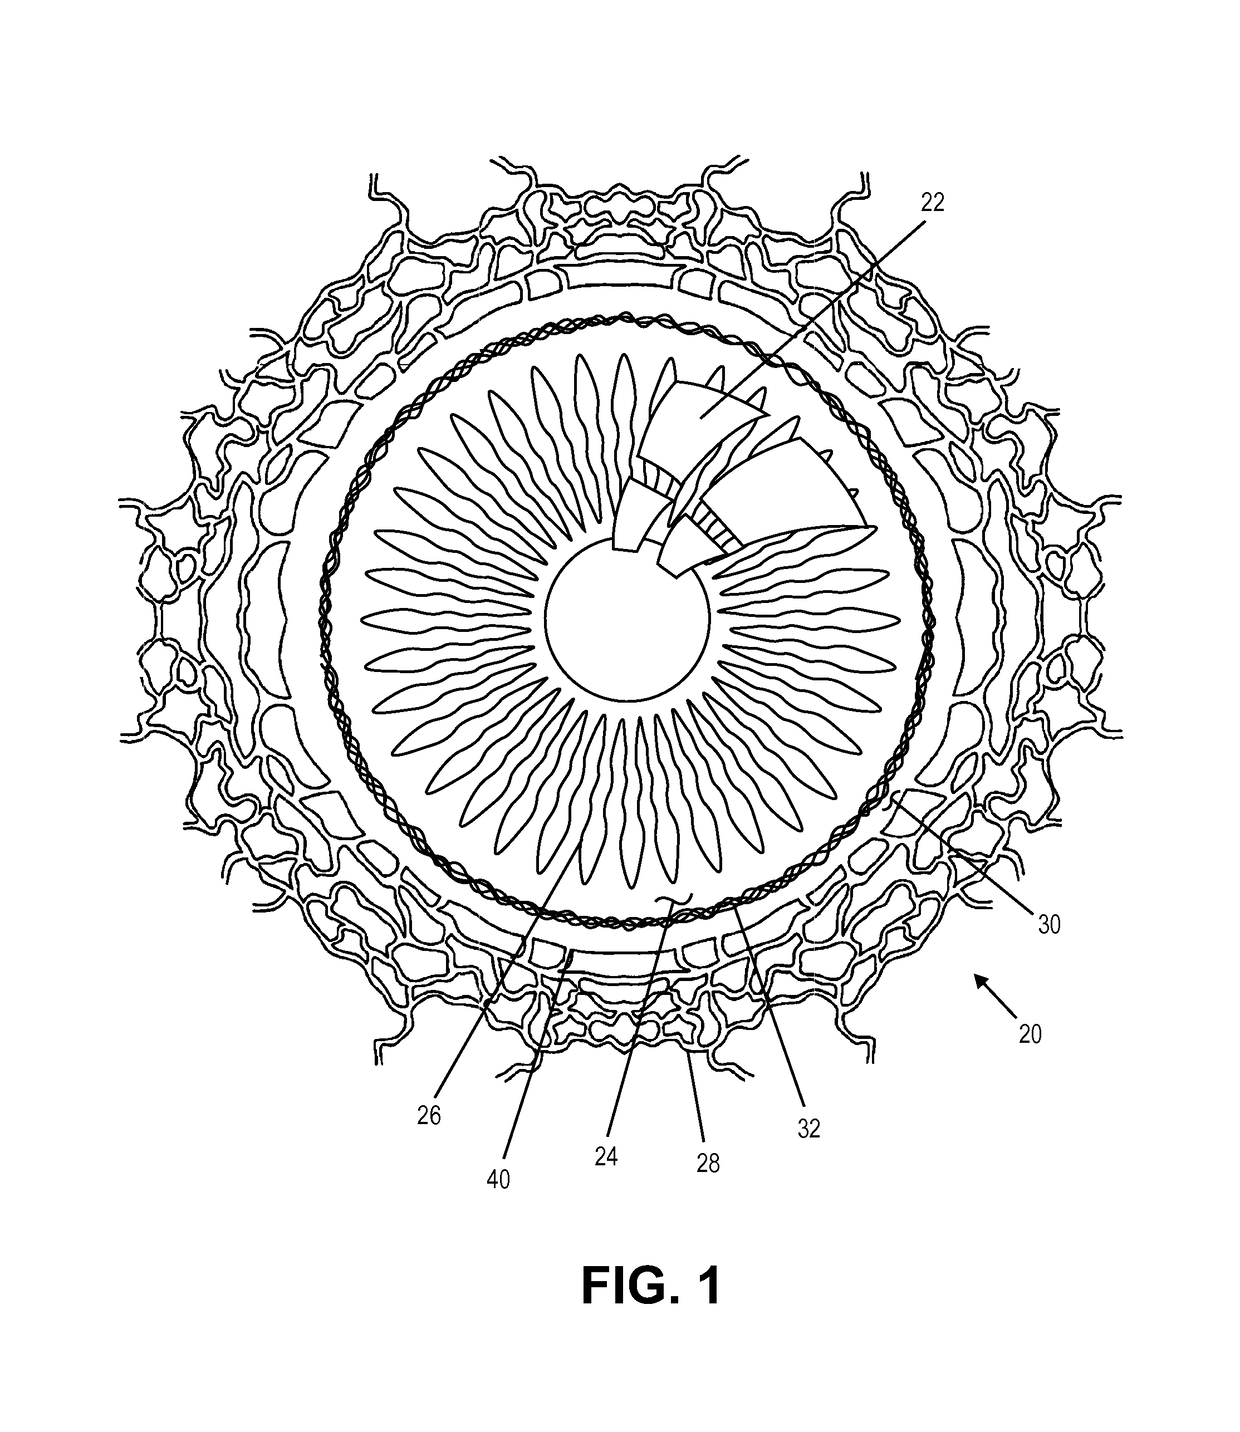 Single operator device for delivering an ocular implant